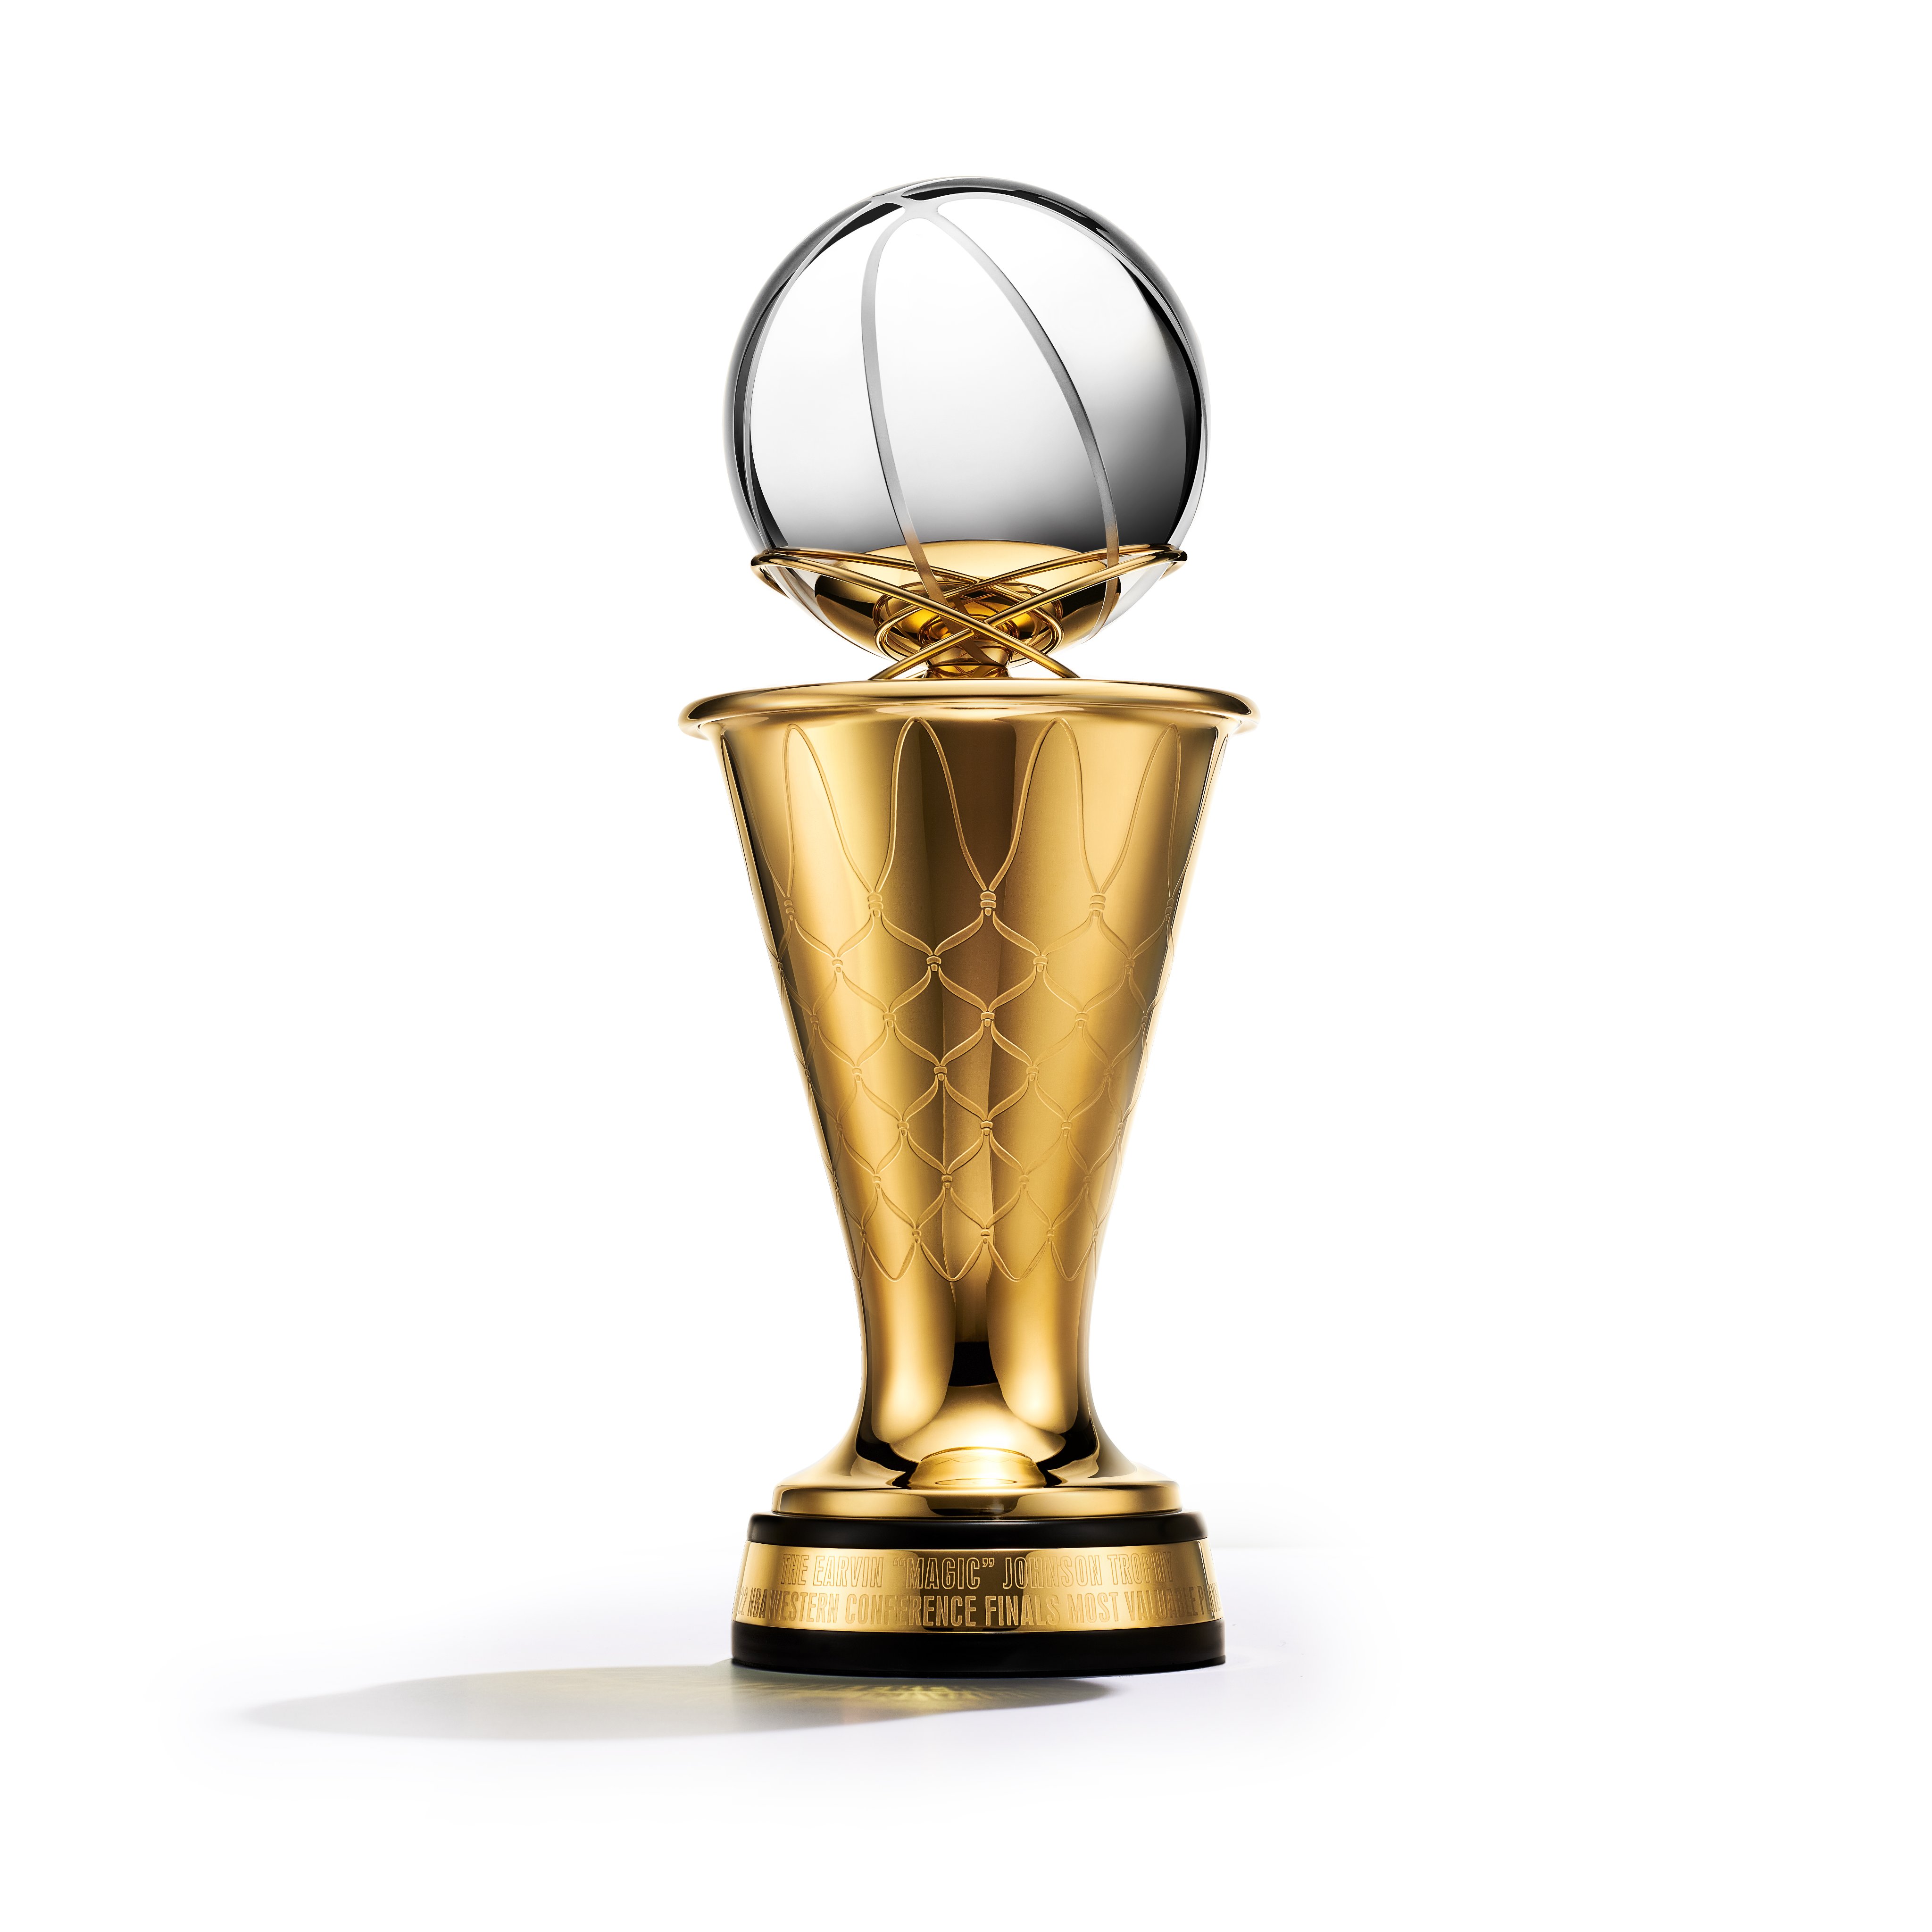 Earvin Magic Johnson on X: Thank you to the @NBA for naming the new  Western Conference Finals MVP trophy after me. I am extremely honored and  the trophy is beautiful!  /